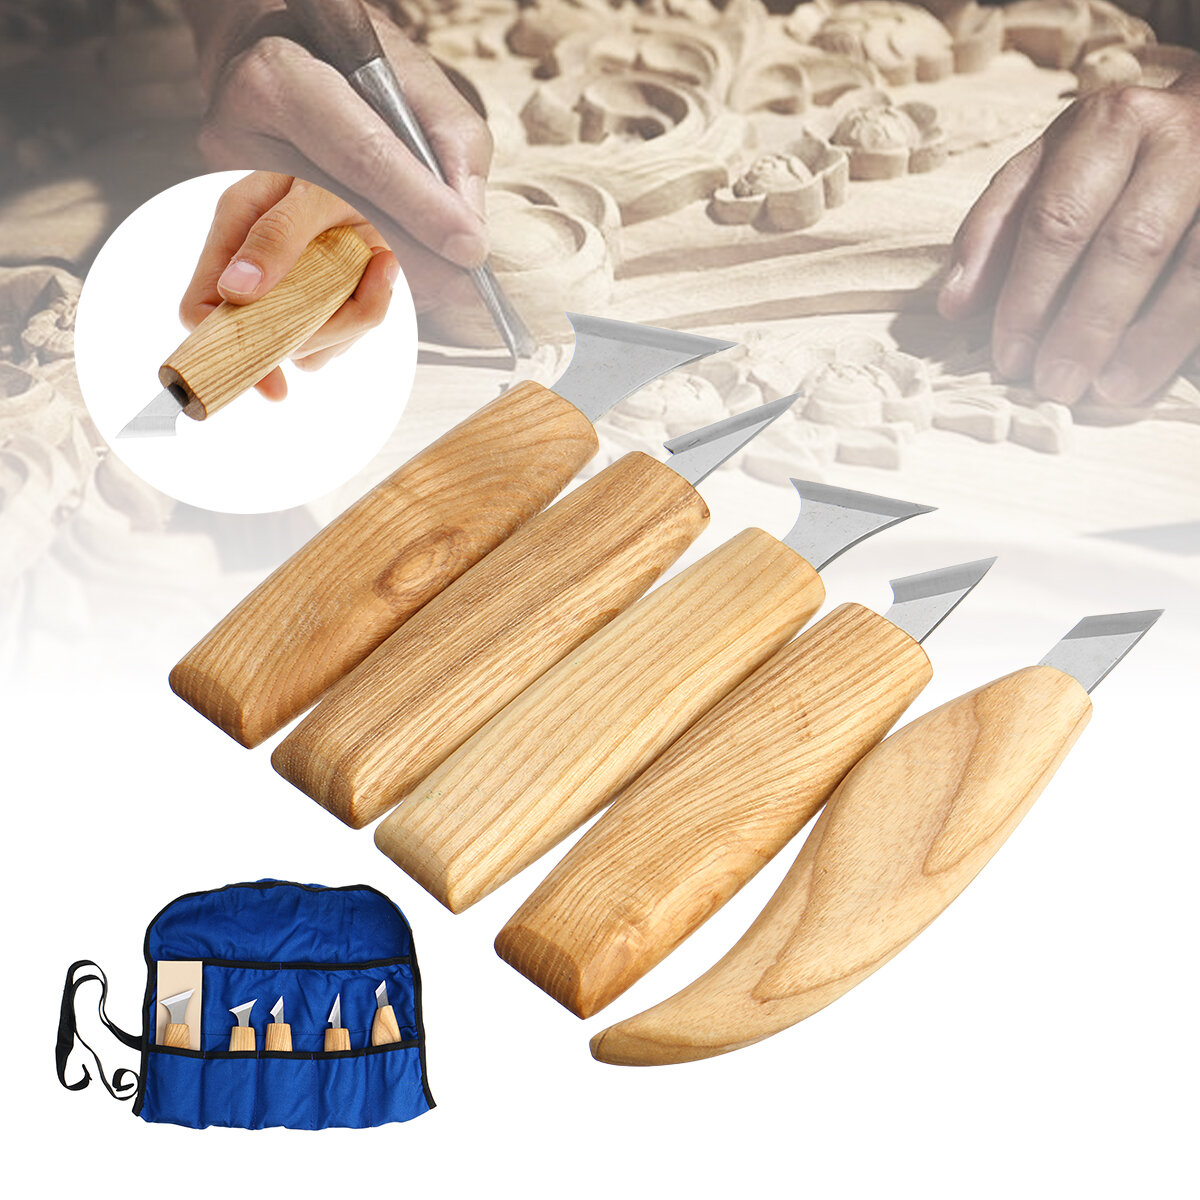 

8pcs Wood Carving Chisel Cutter Kit Woodworking Whittling Cutter Gouges Tool